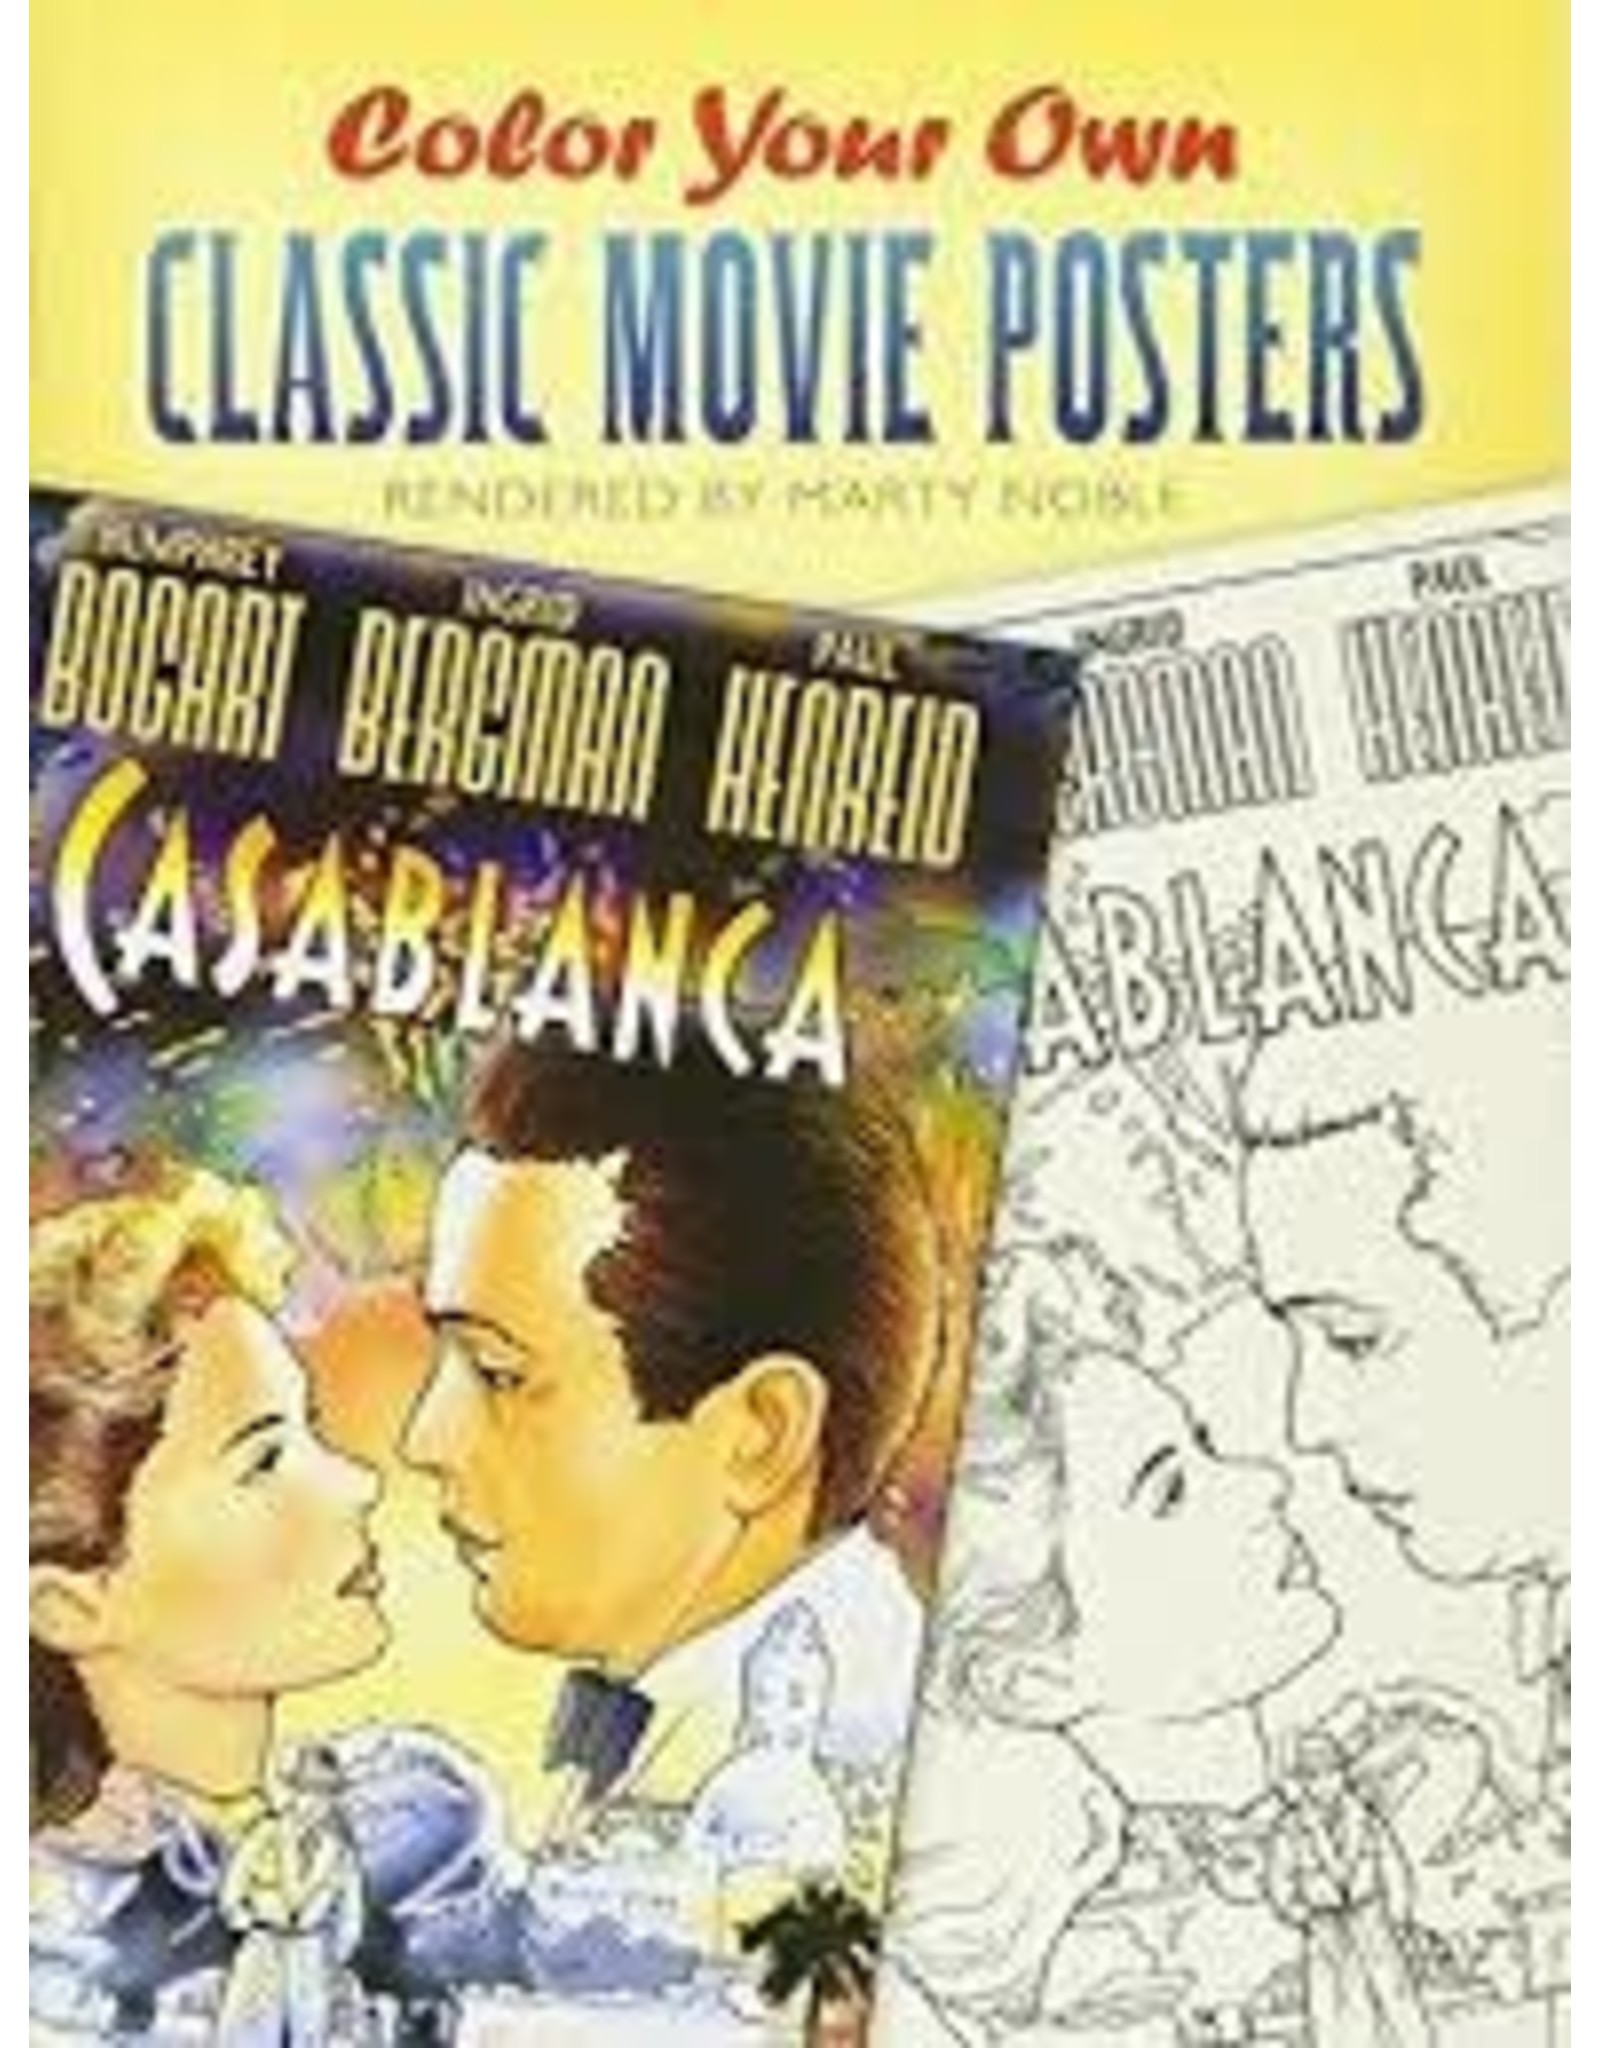 Classic Movie Posters - Marty Noble